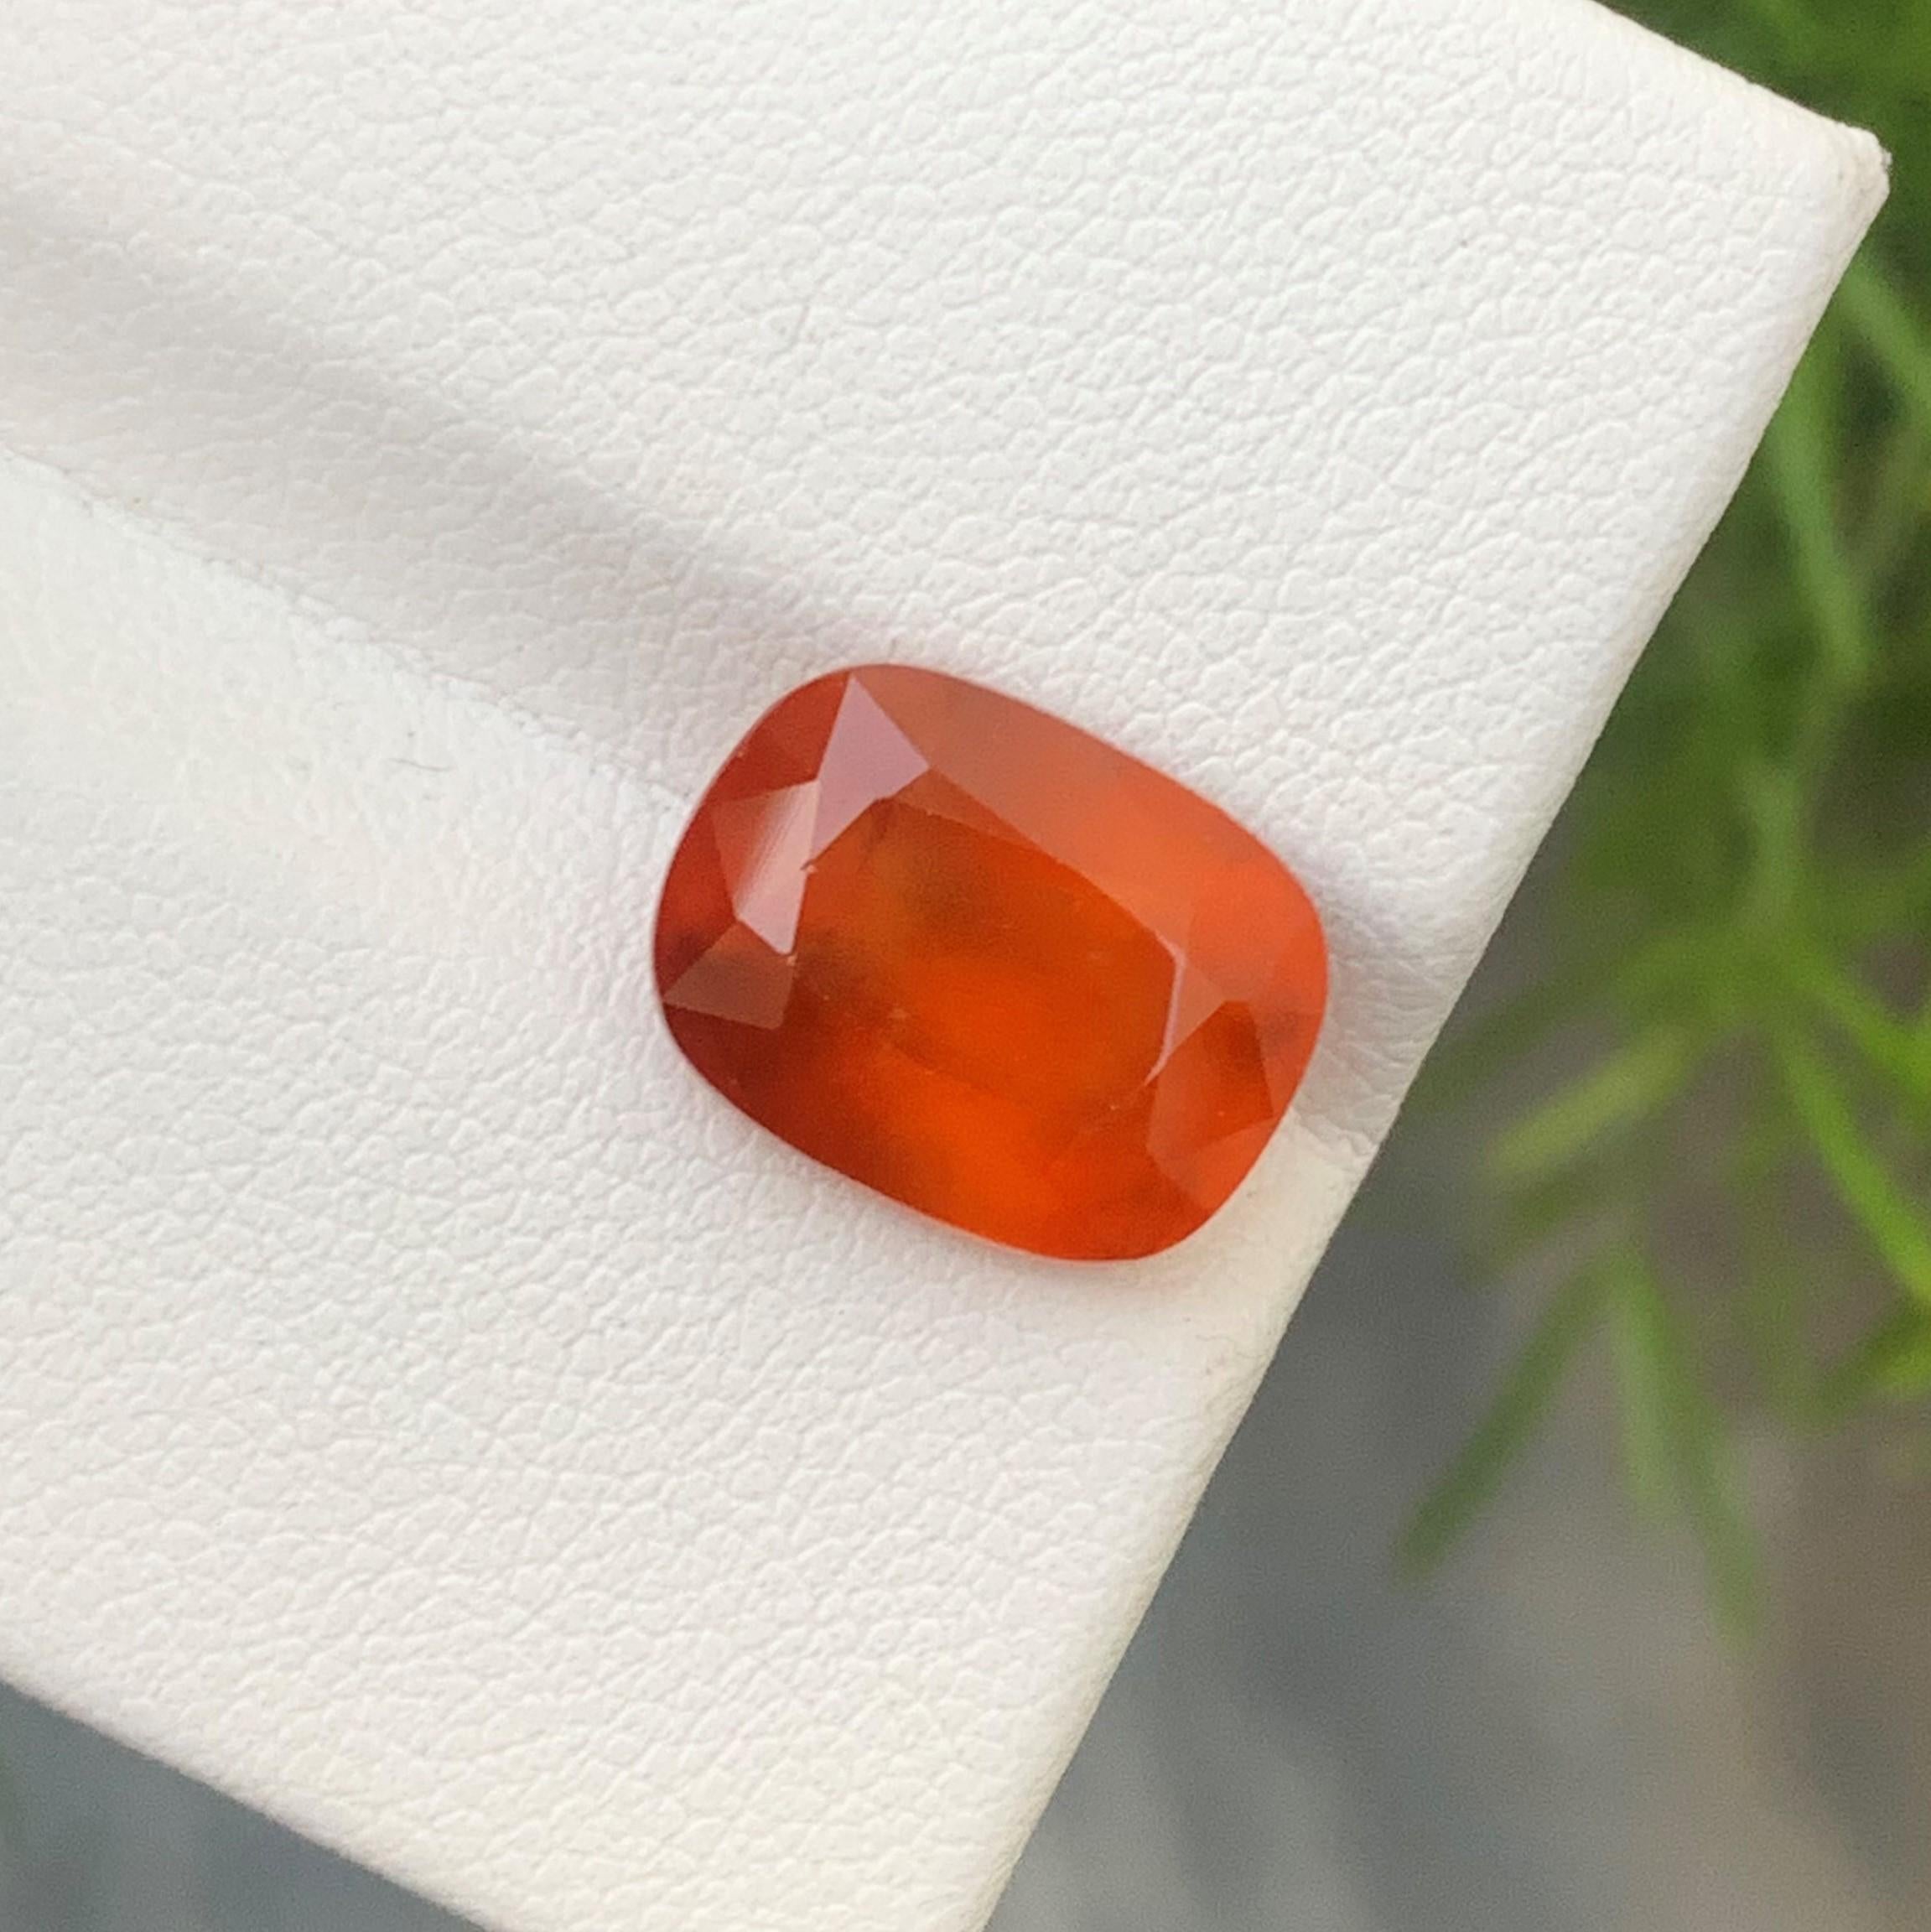 Gemstone Type : Hessonite Garnet
Weight : 6.95 Carats
Dimensions : 12.3x9.5x7.1 Mm
Origin : Africa
Clarity : Smoky 
Shape: Long Cushion
Color: Fanta Orange
Certificate: On Demand
Birthstone: January Month
According to Vedic astrologists, wearing a